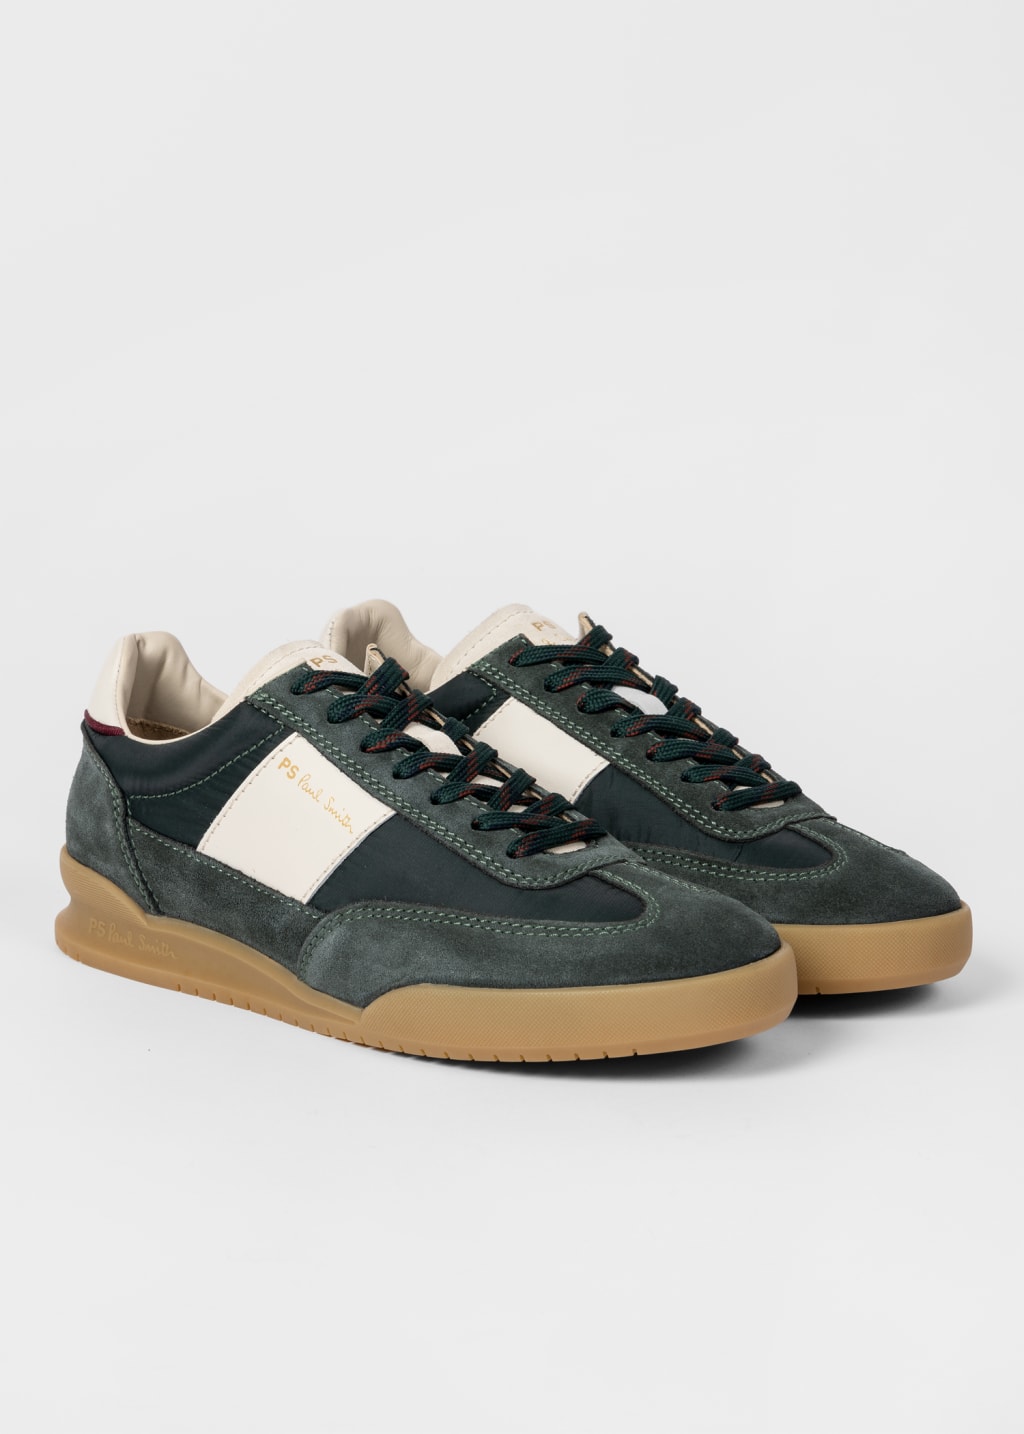 Detail View - Dark Green 'Dover' Trainers Paul Smith